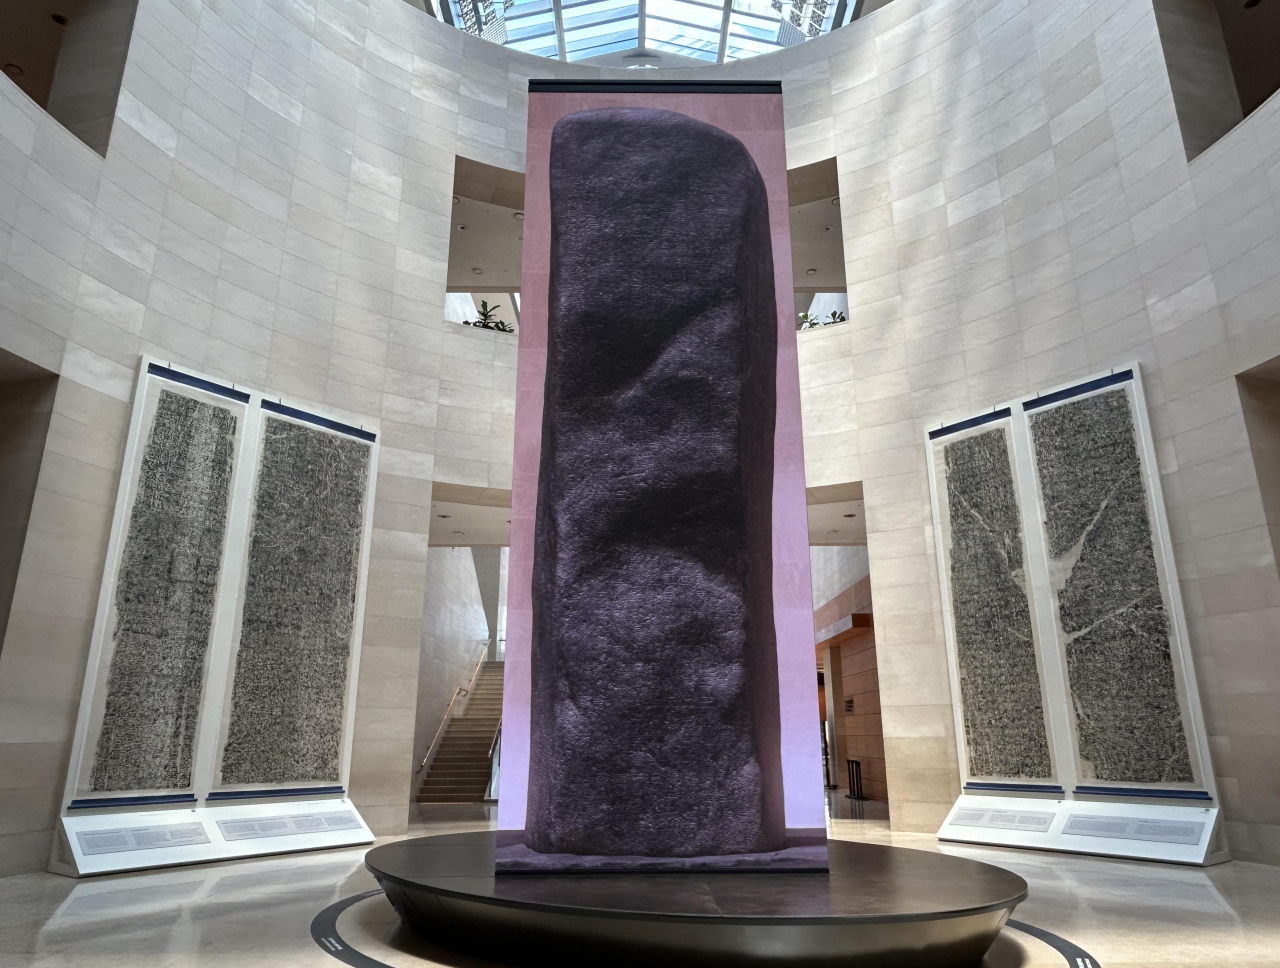 A digitally reproduced memorial stele for Gwanggaeto the Great of Goguryeo is unveiled at the National Museum of Korea in Seoul on Wednesday. (Yonhap)